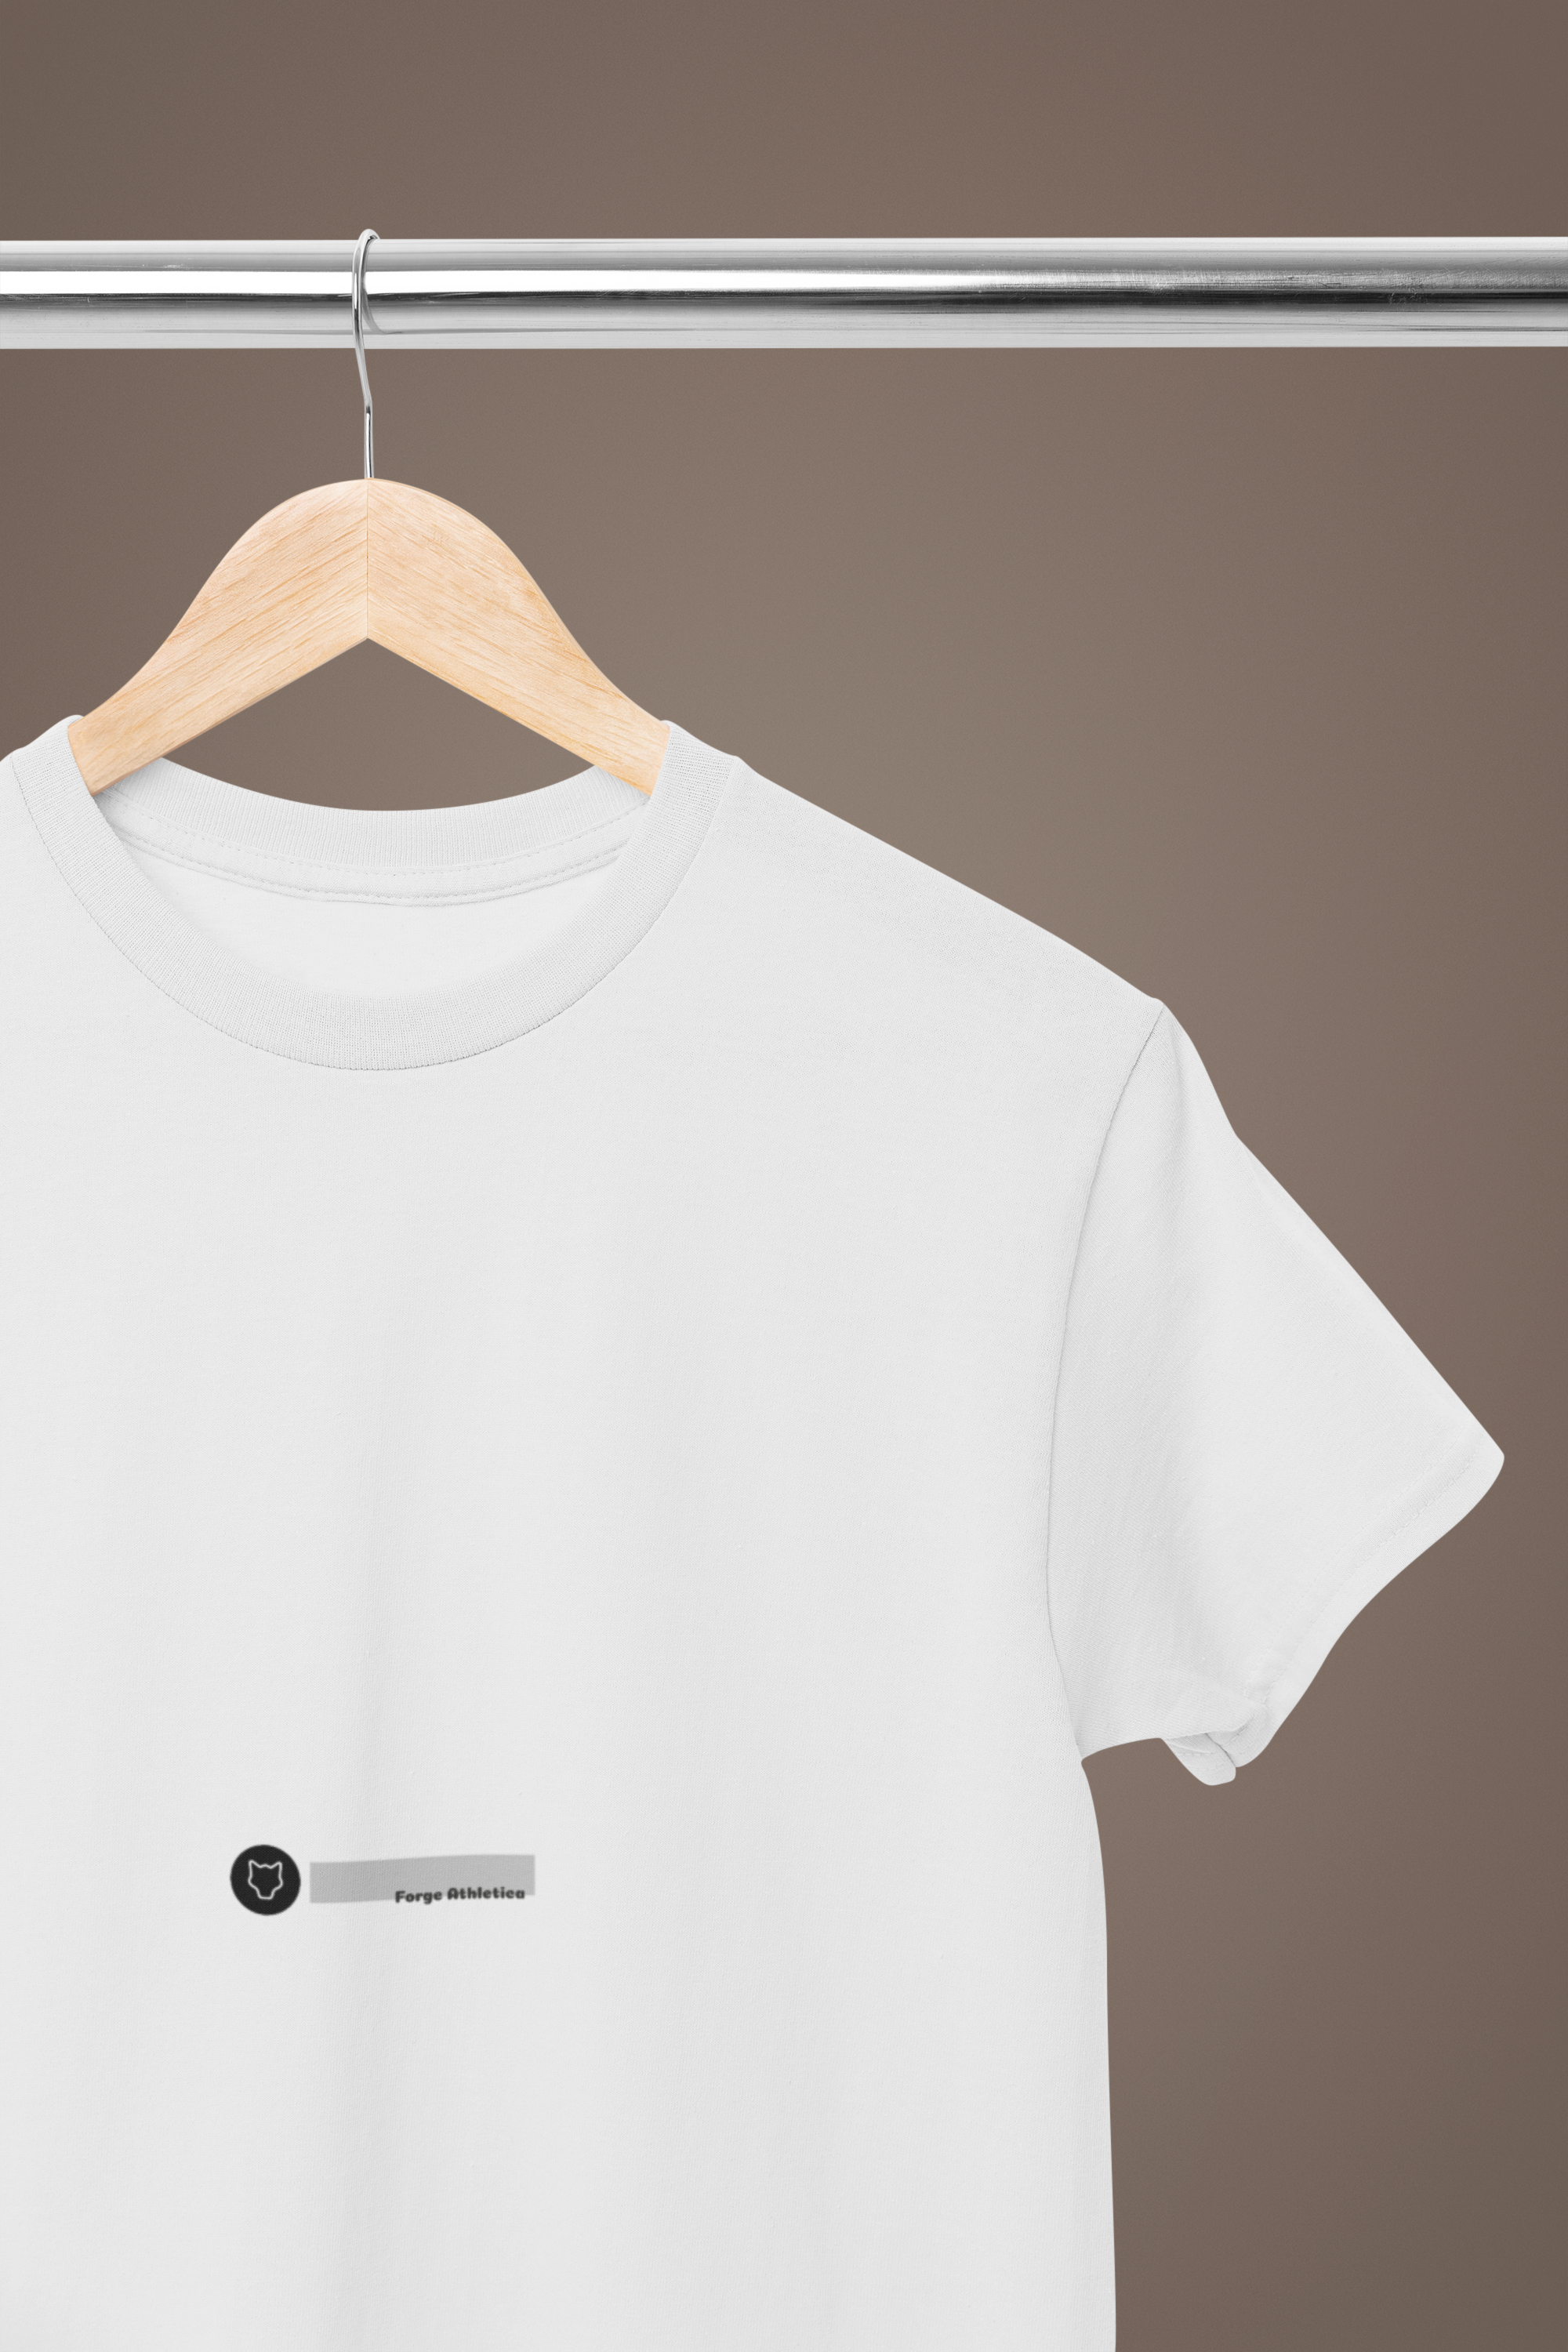 A white minimalistic T-Shirt hanged on a metallic rod and a wooden hanger.